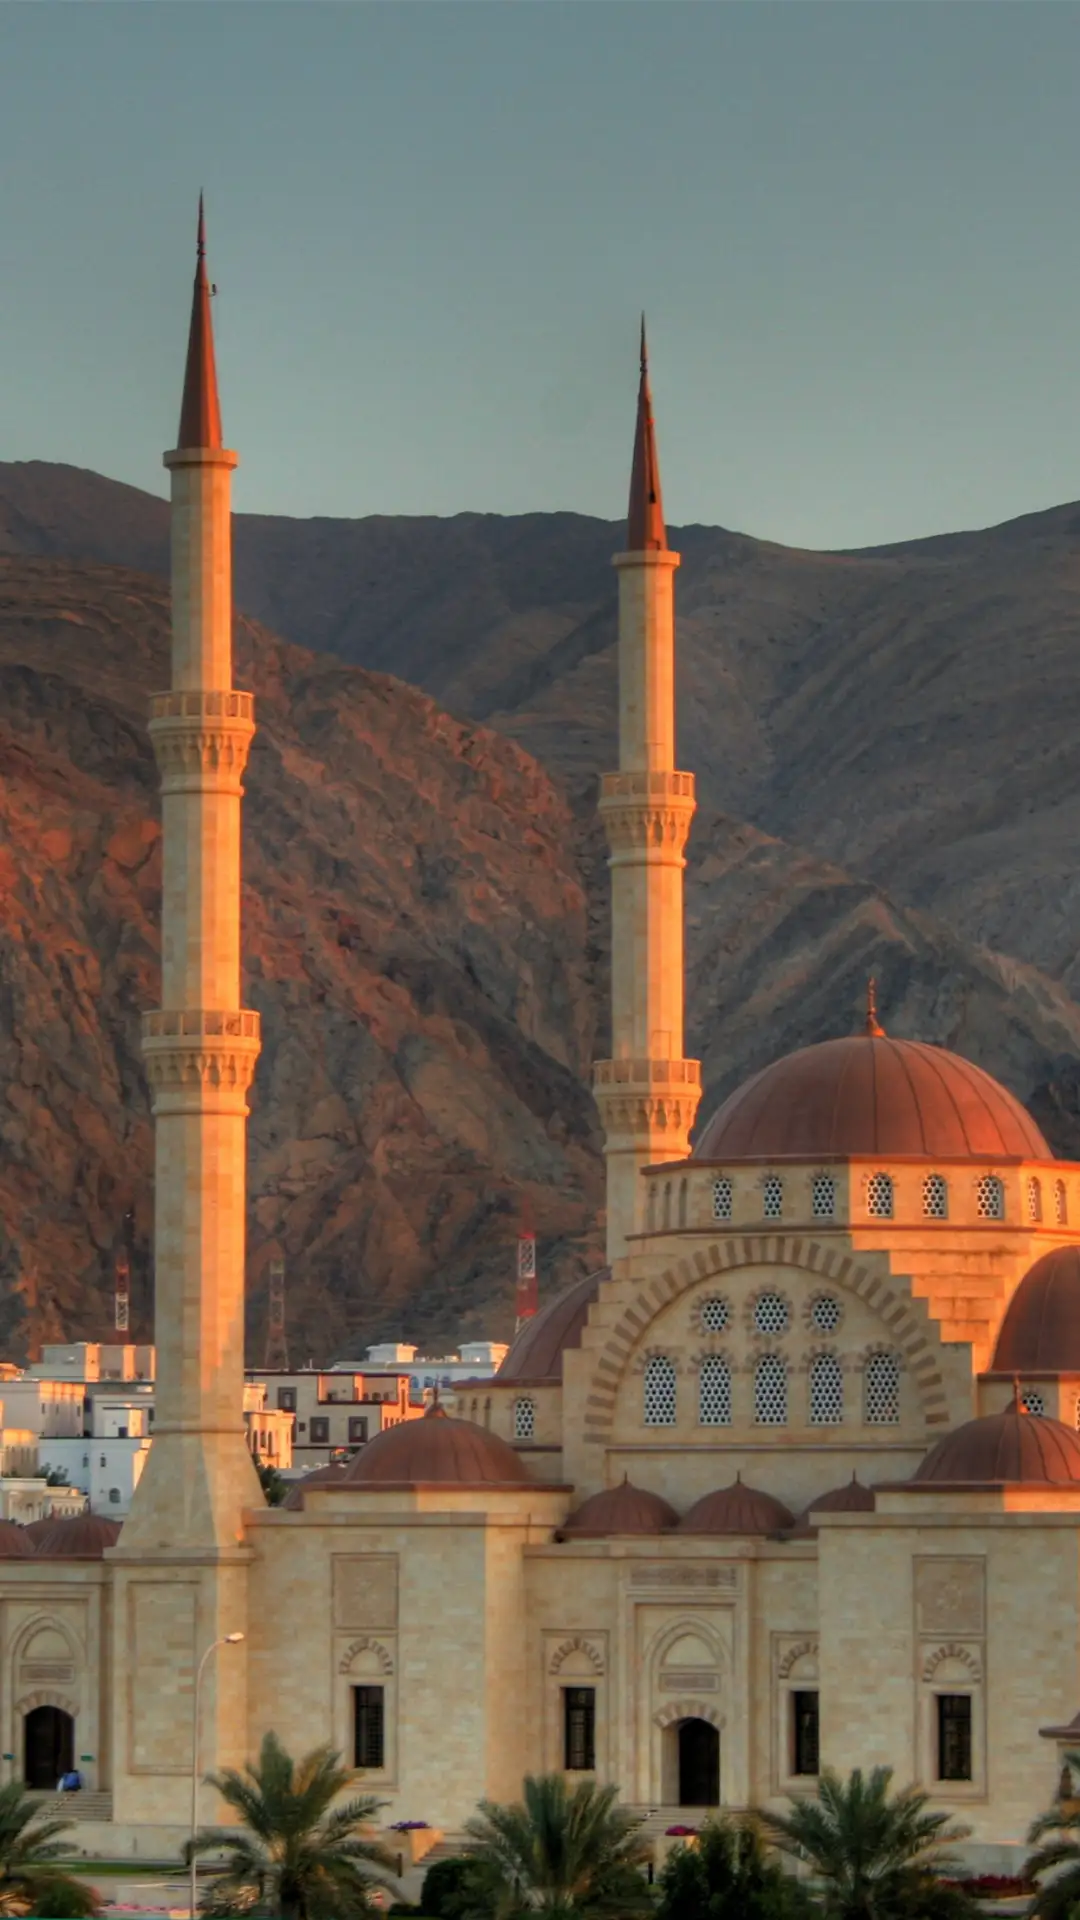 Mosque with two minarets in Muscat, Oman.